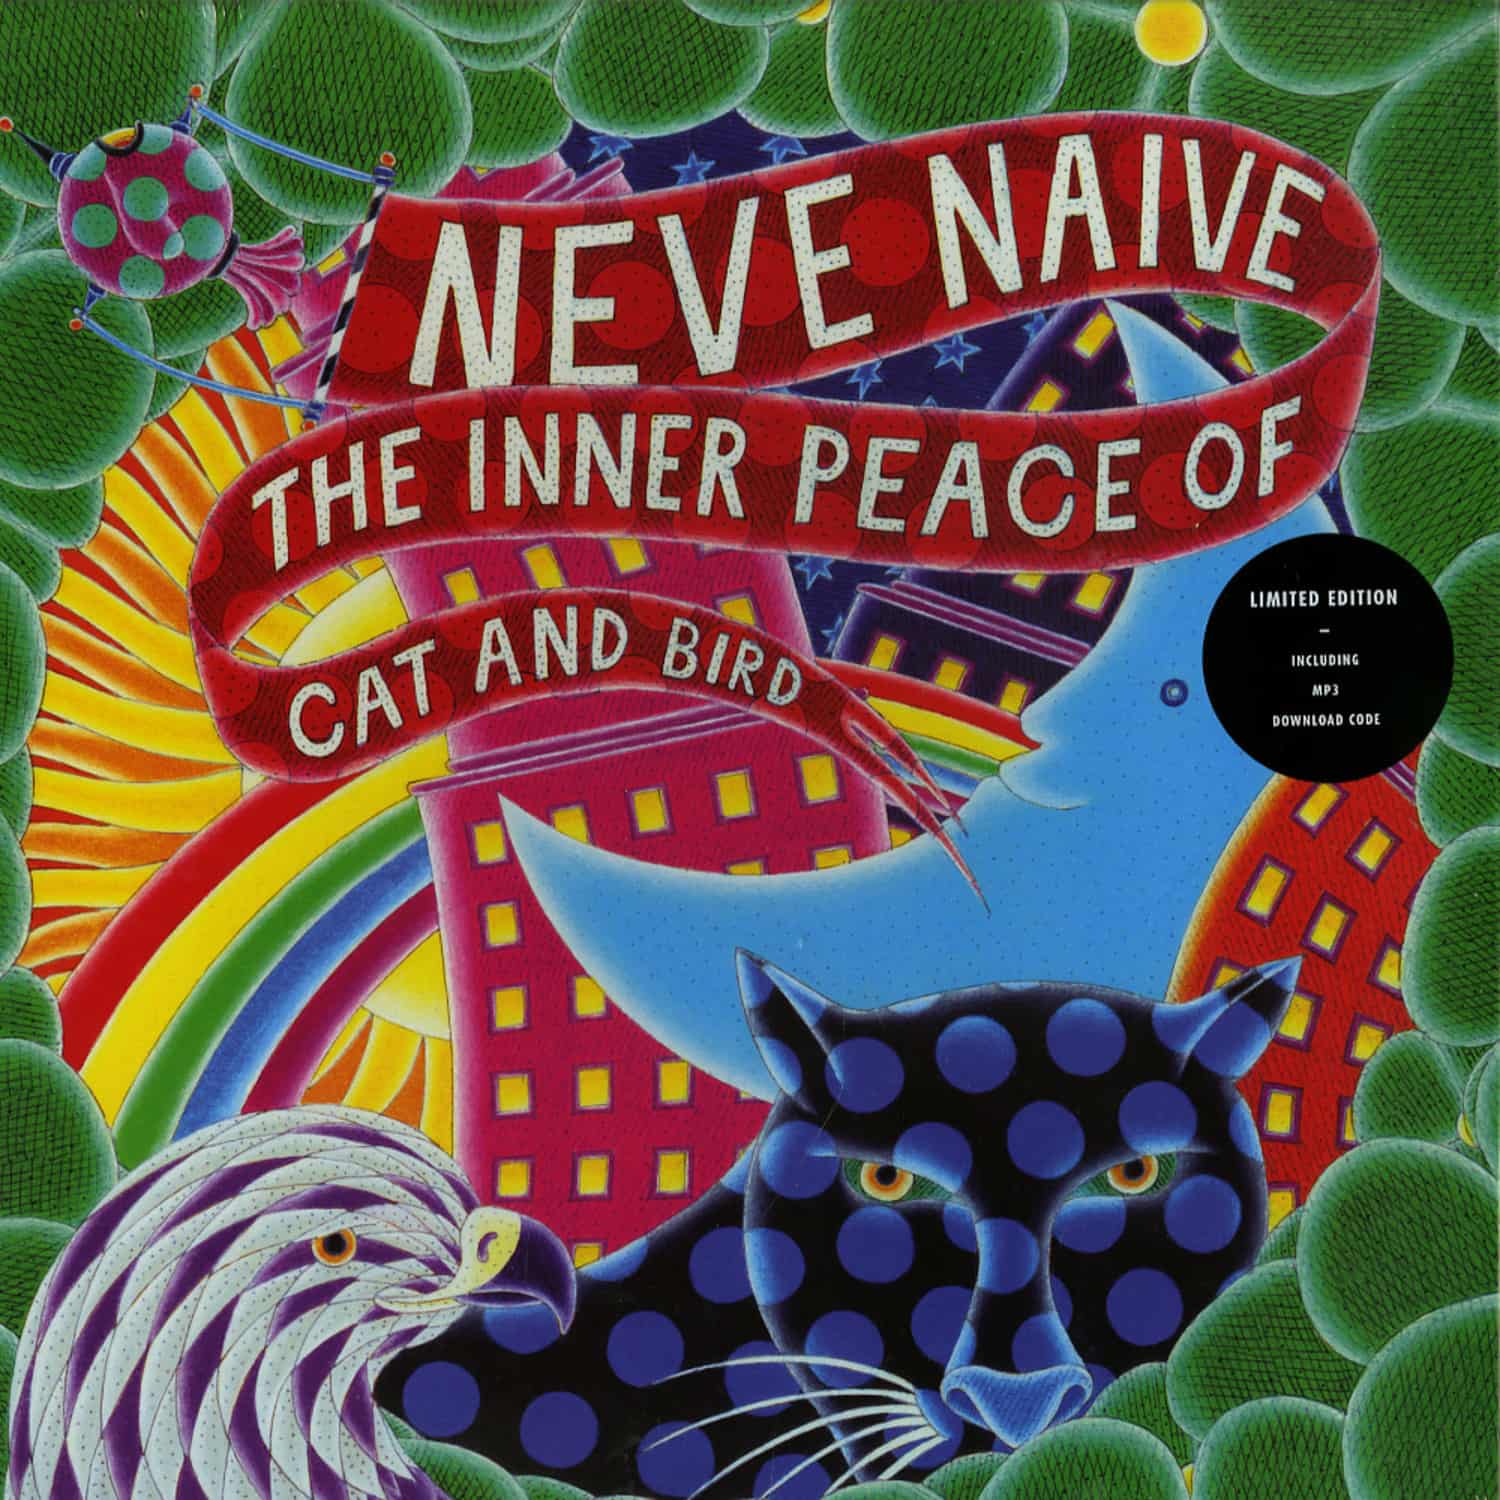 Neve Naive - THE INNER PEACE OF CAT AND BIRD 